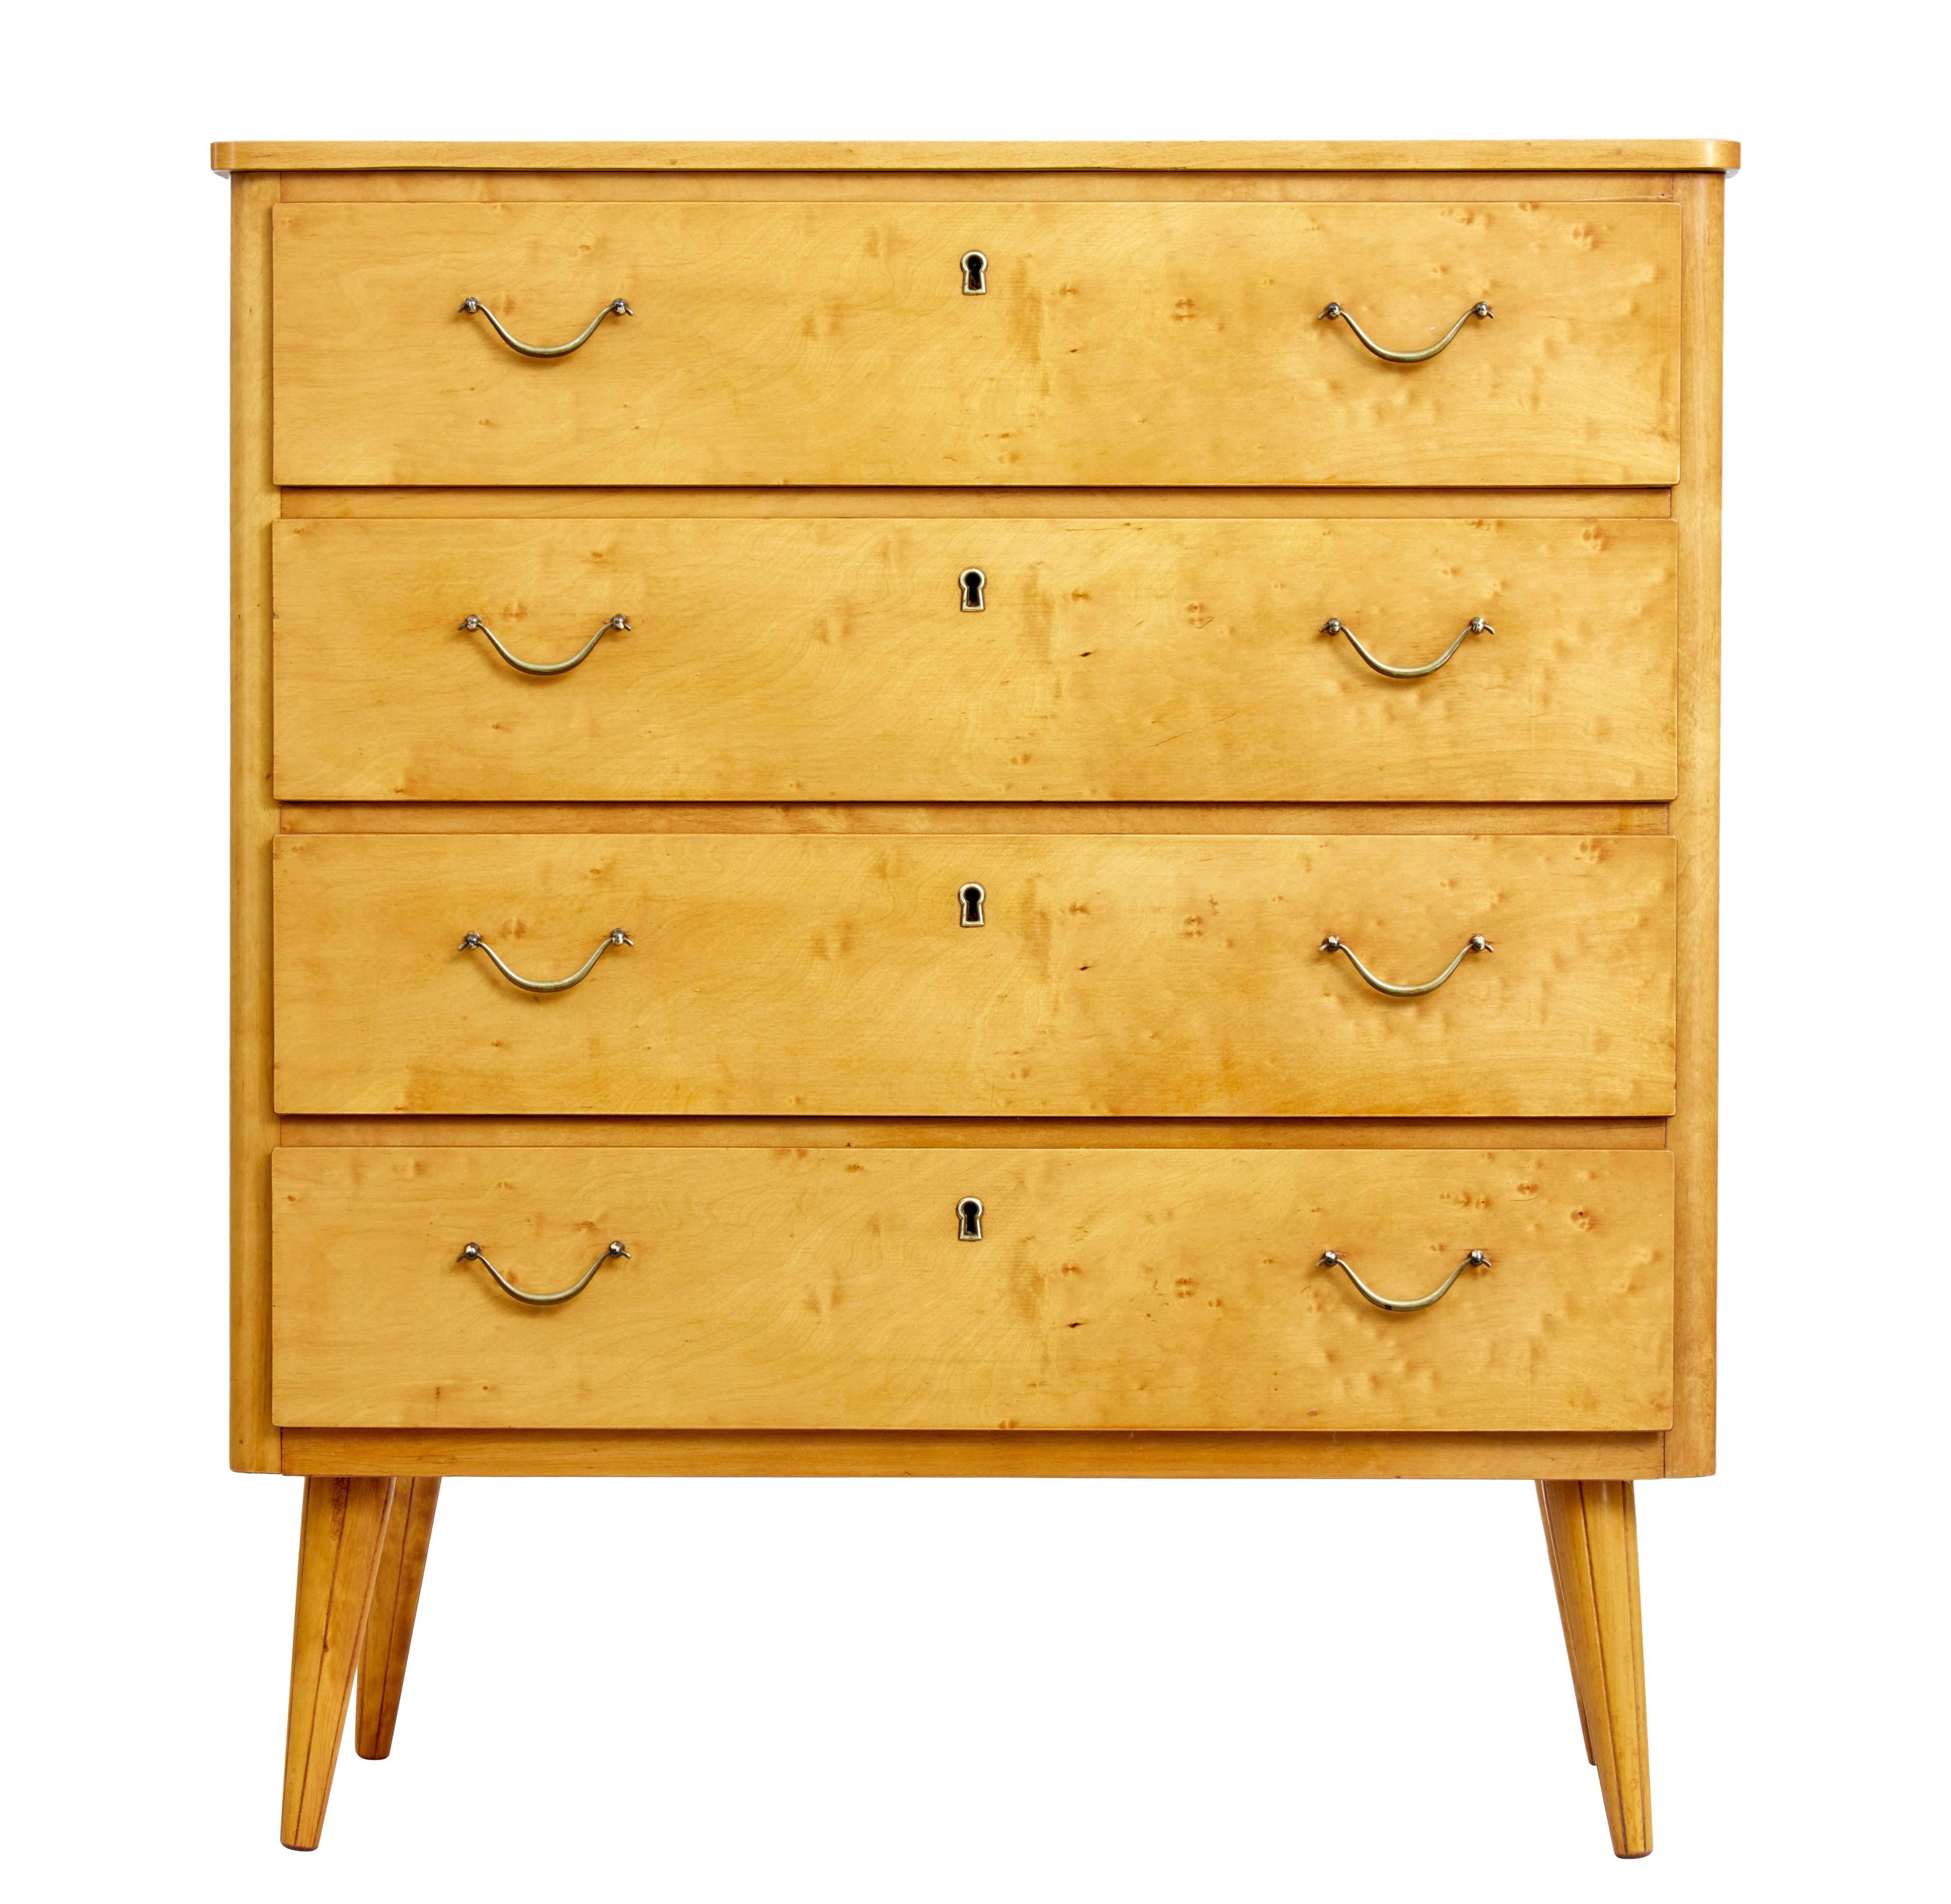 Four drawer chest of drawers from Sweden, circa 1950.

Drawers fitted with brass modern swan neck handles. Rich golden color.

Standing on tapered legs.

Some polish loss to top surface, but perfectly usable.